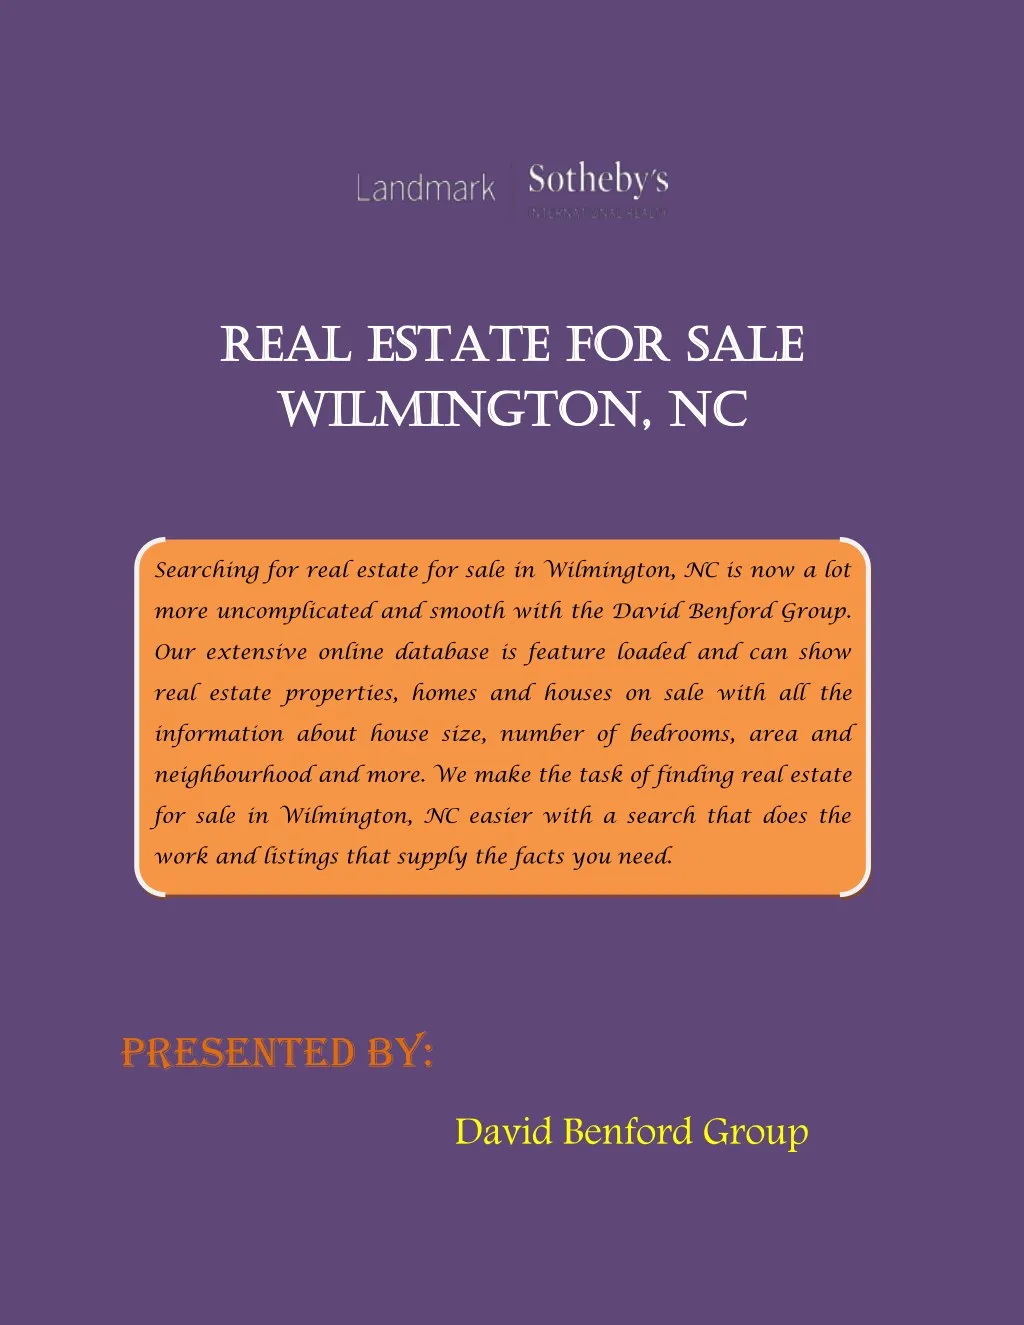 real estate for real estate for sale wilmington